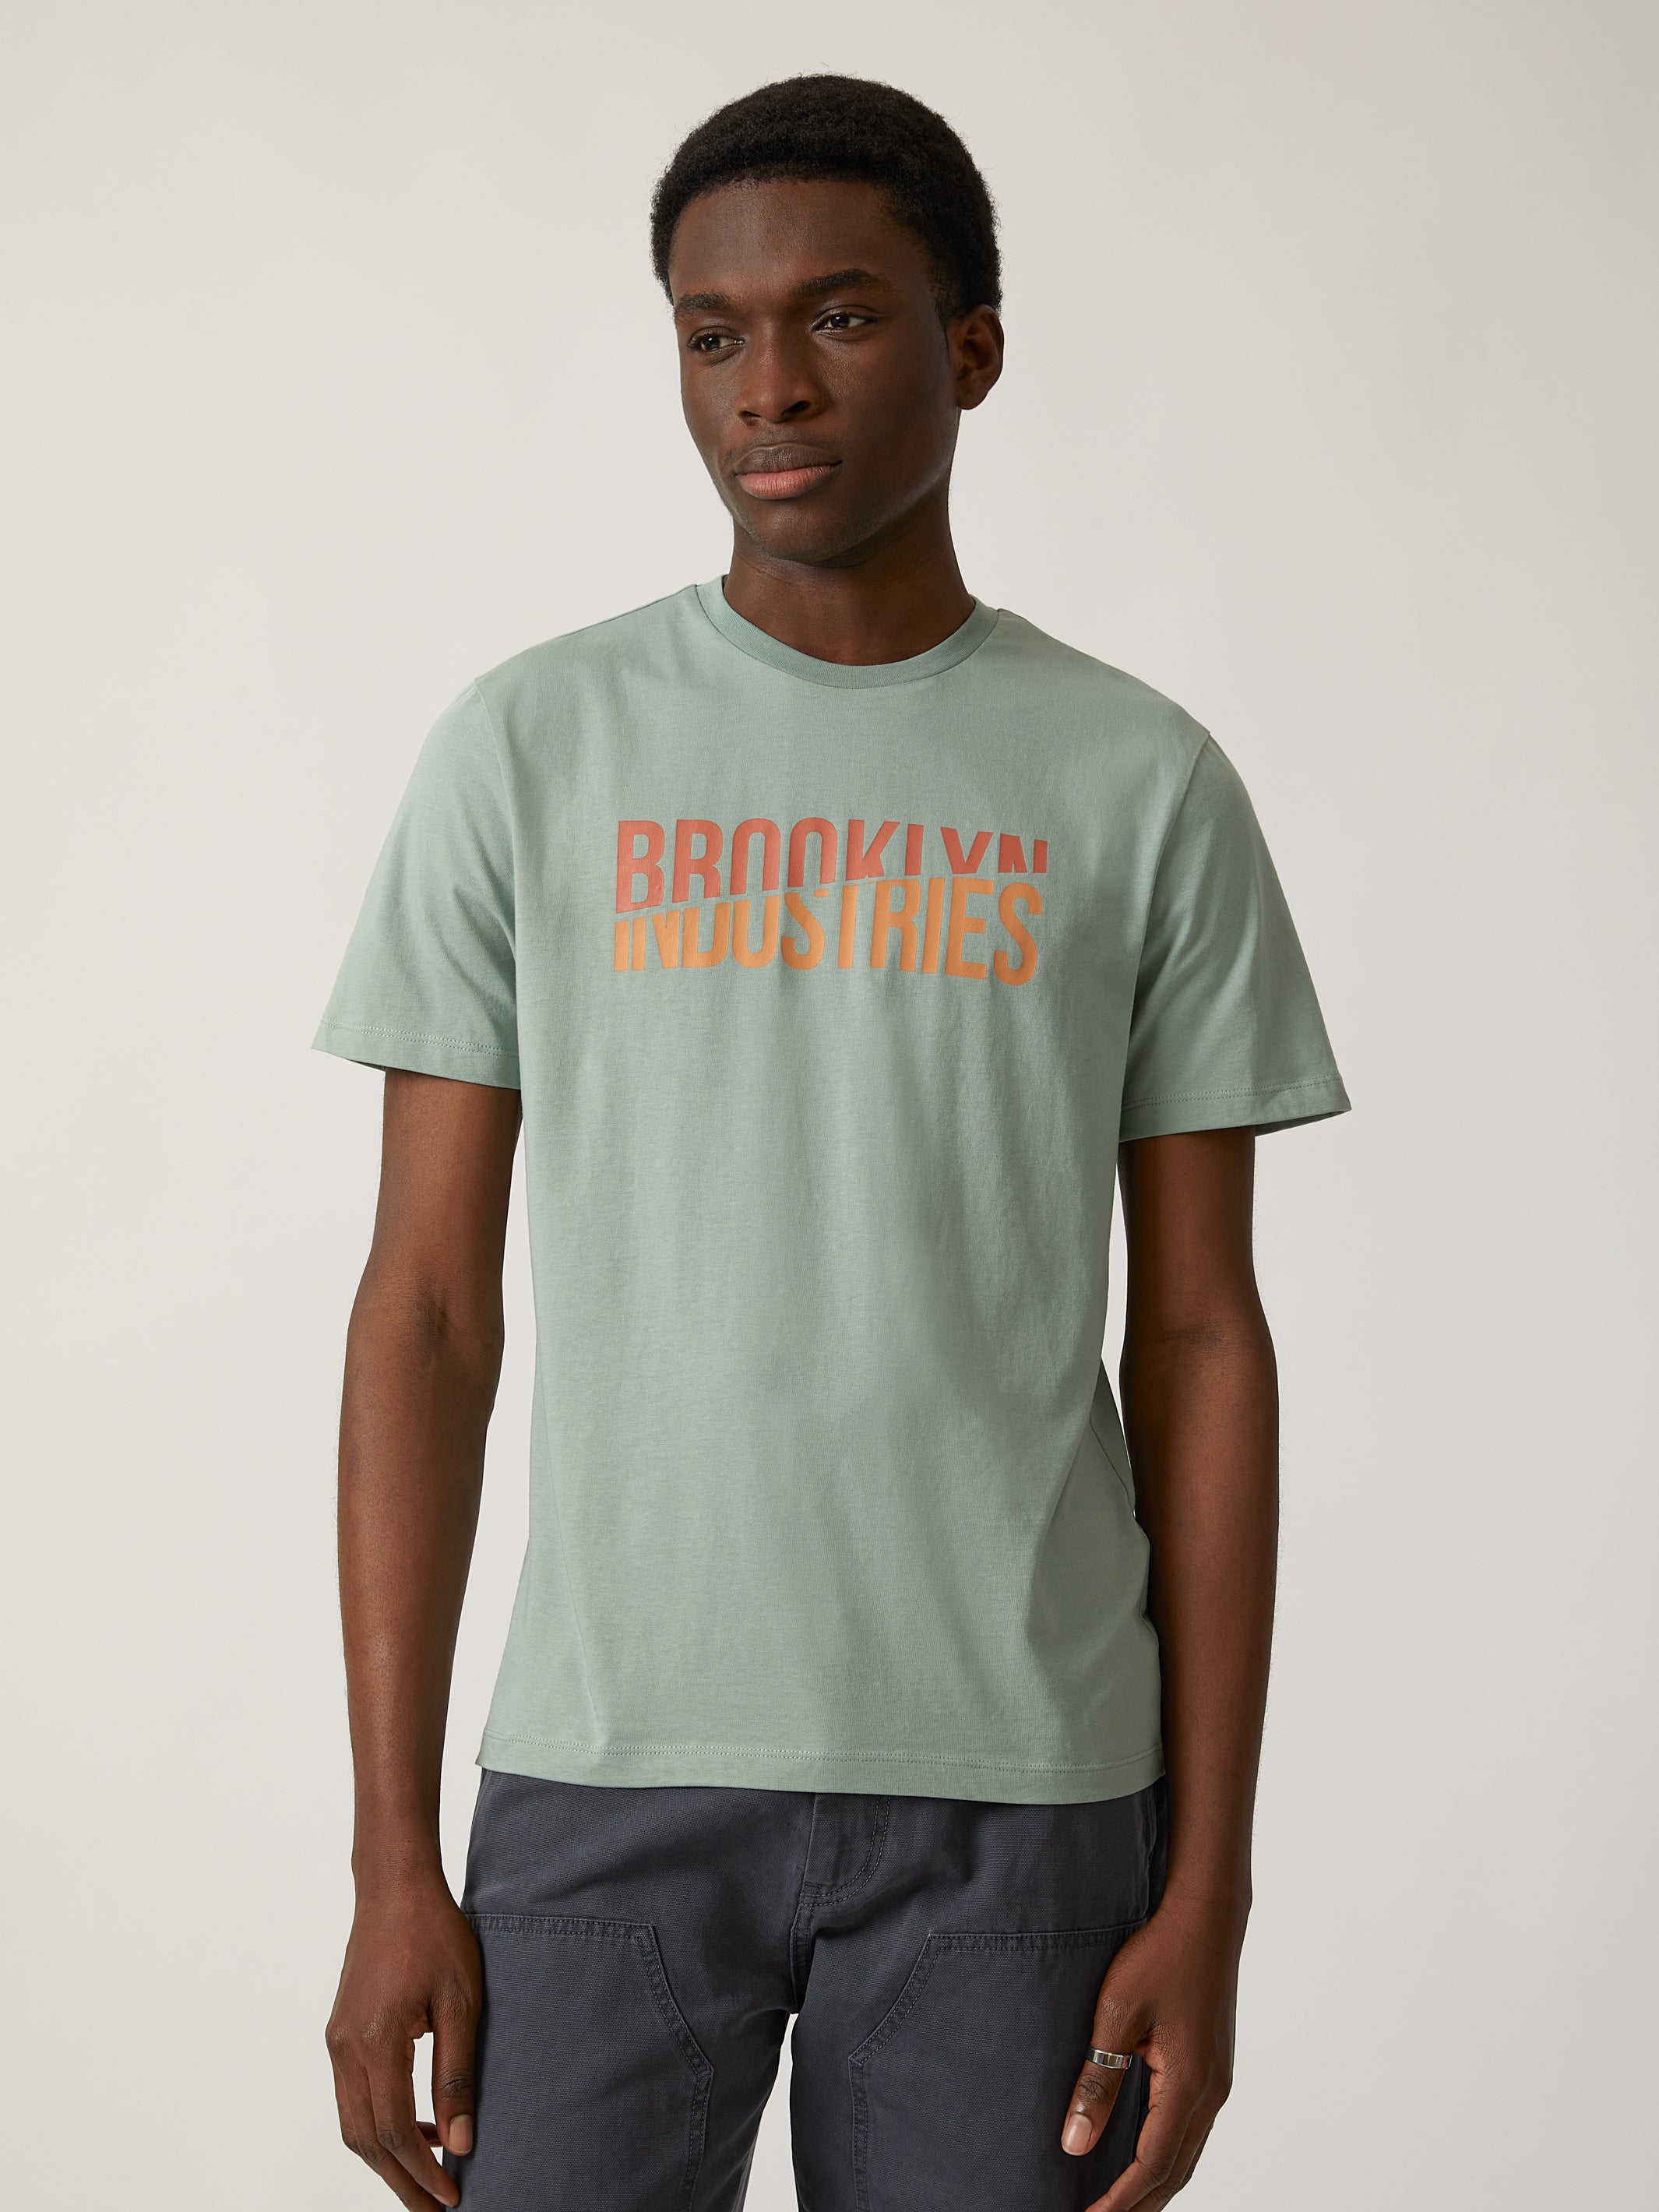 Men's Graphic T-Shirts  Brooklyn Graphic Tees – Brooklyn Industries